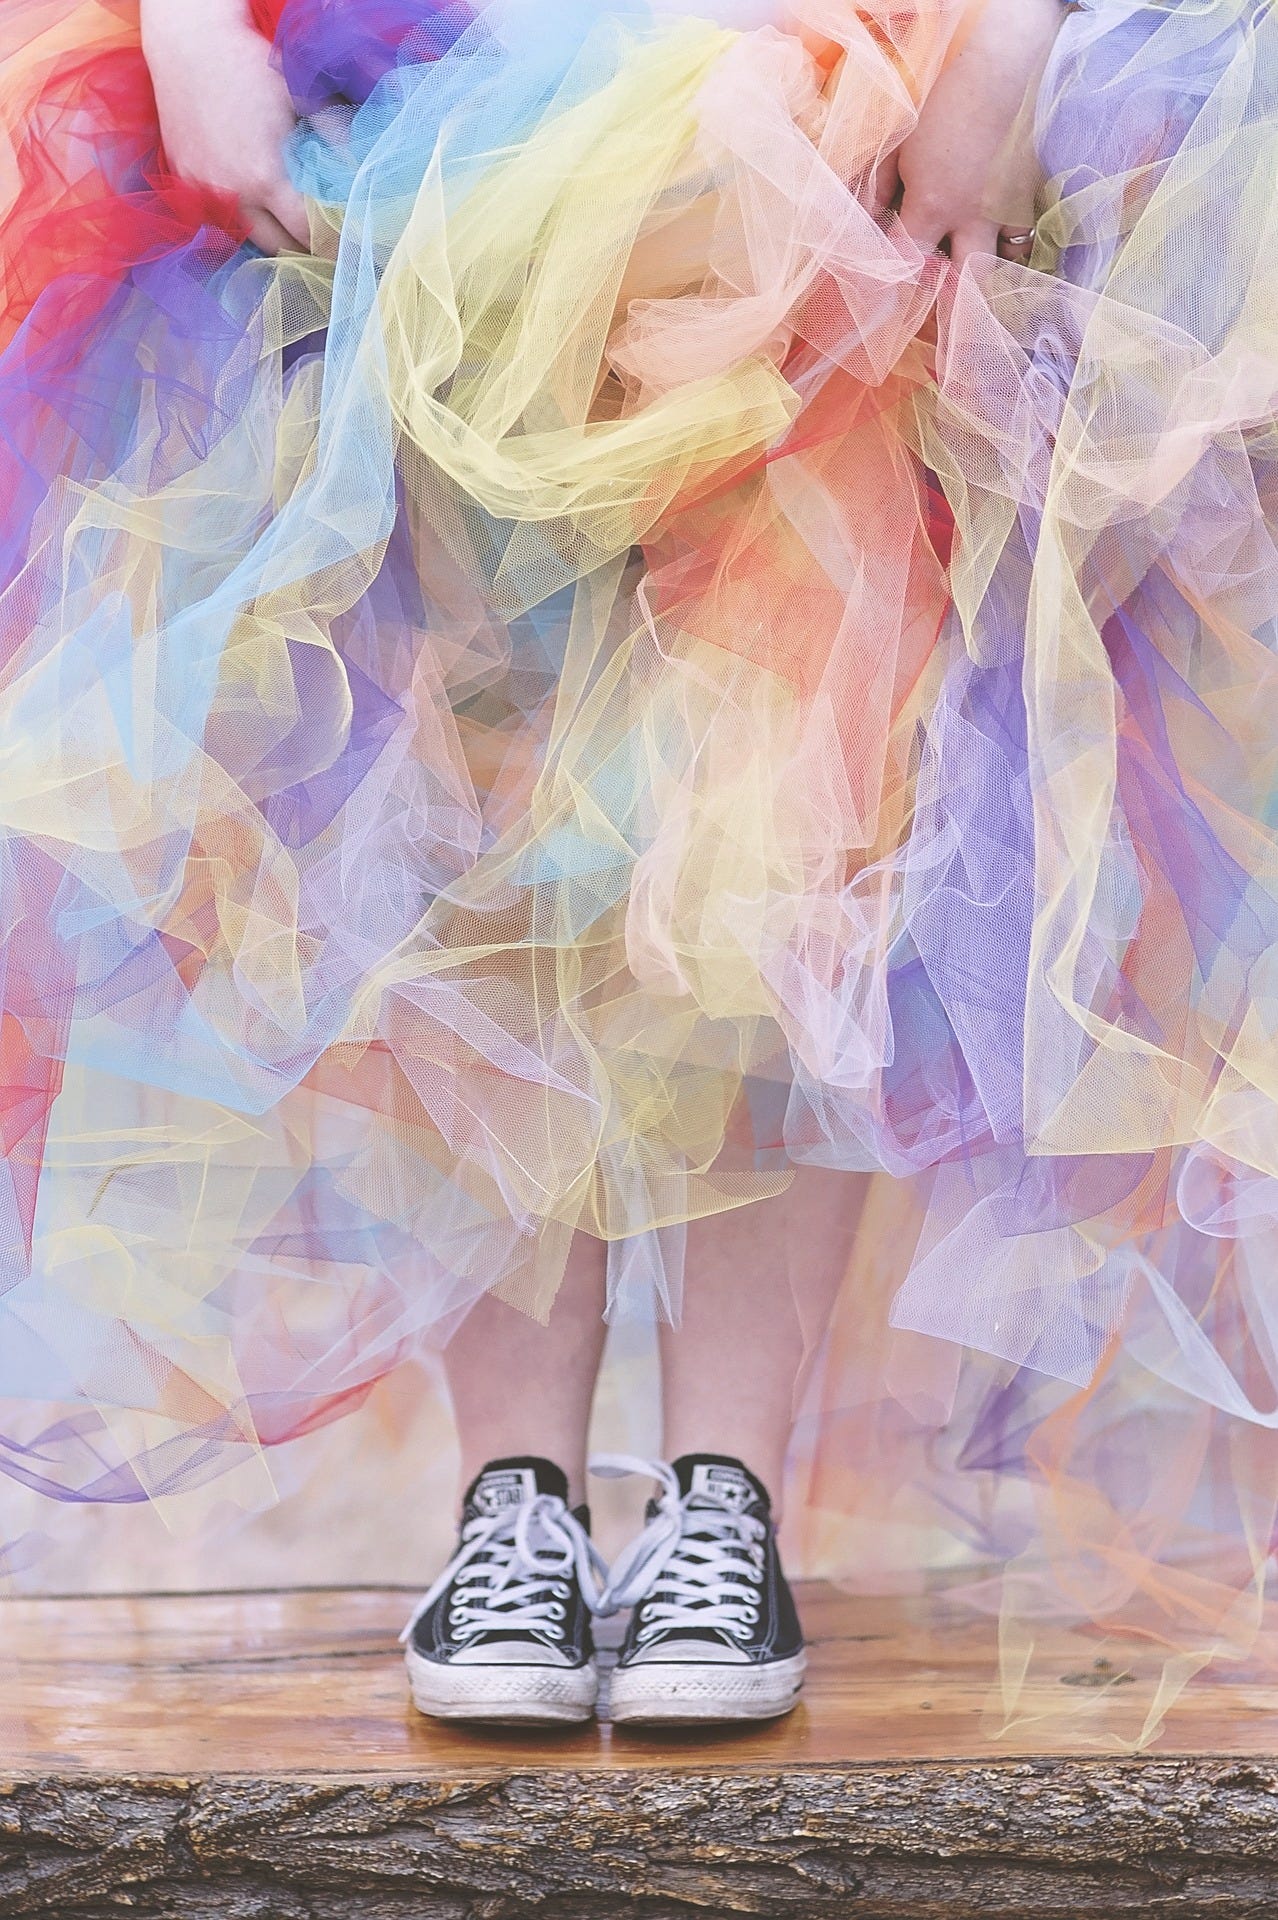 The light caress of tulle